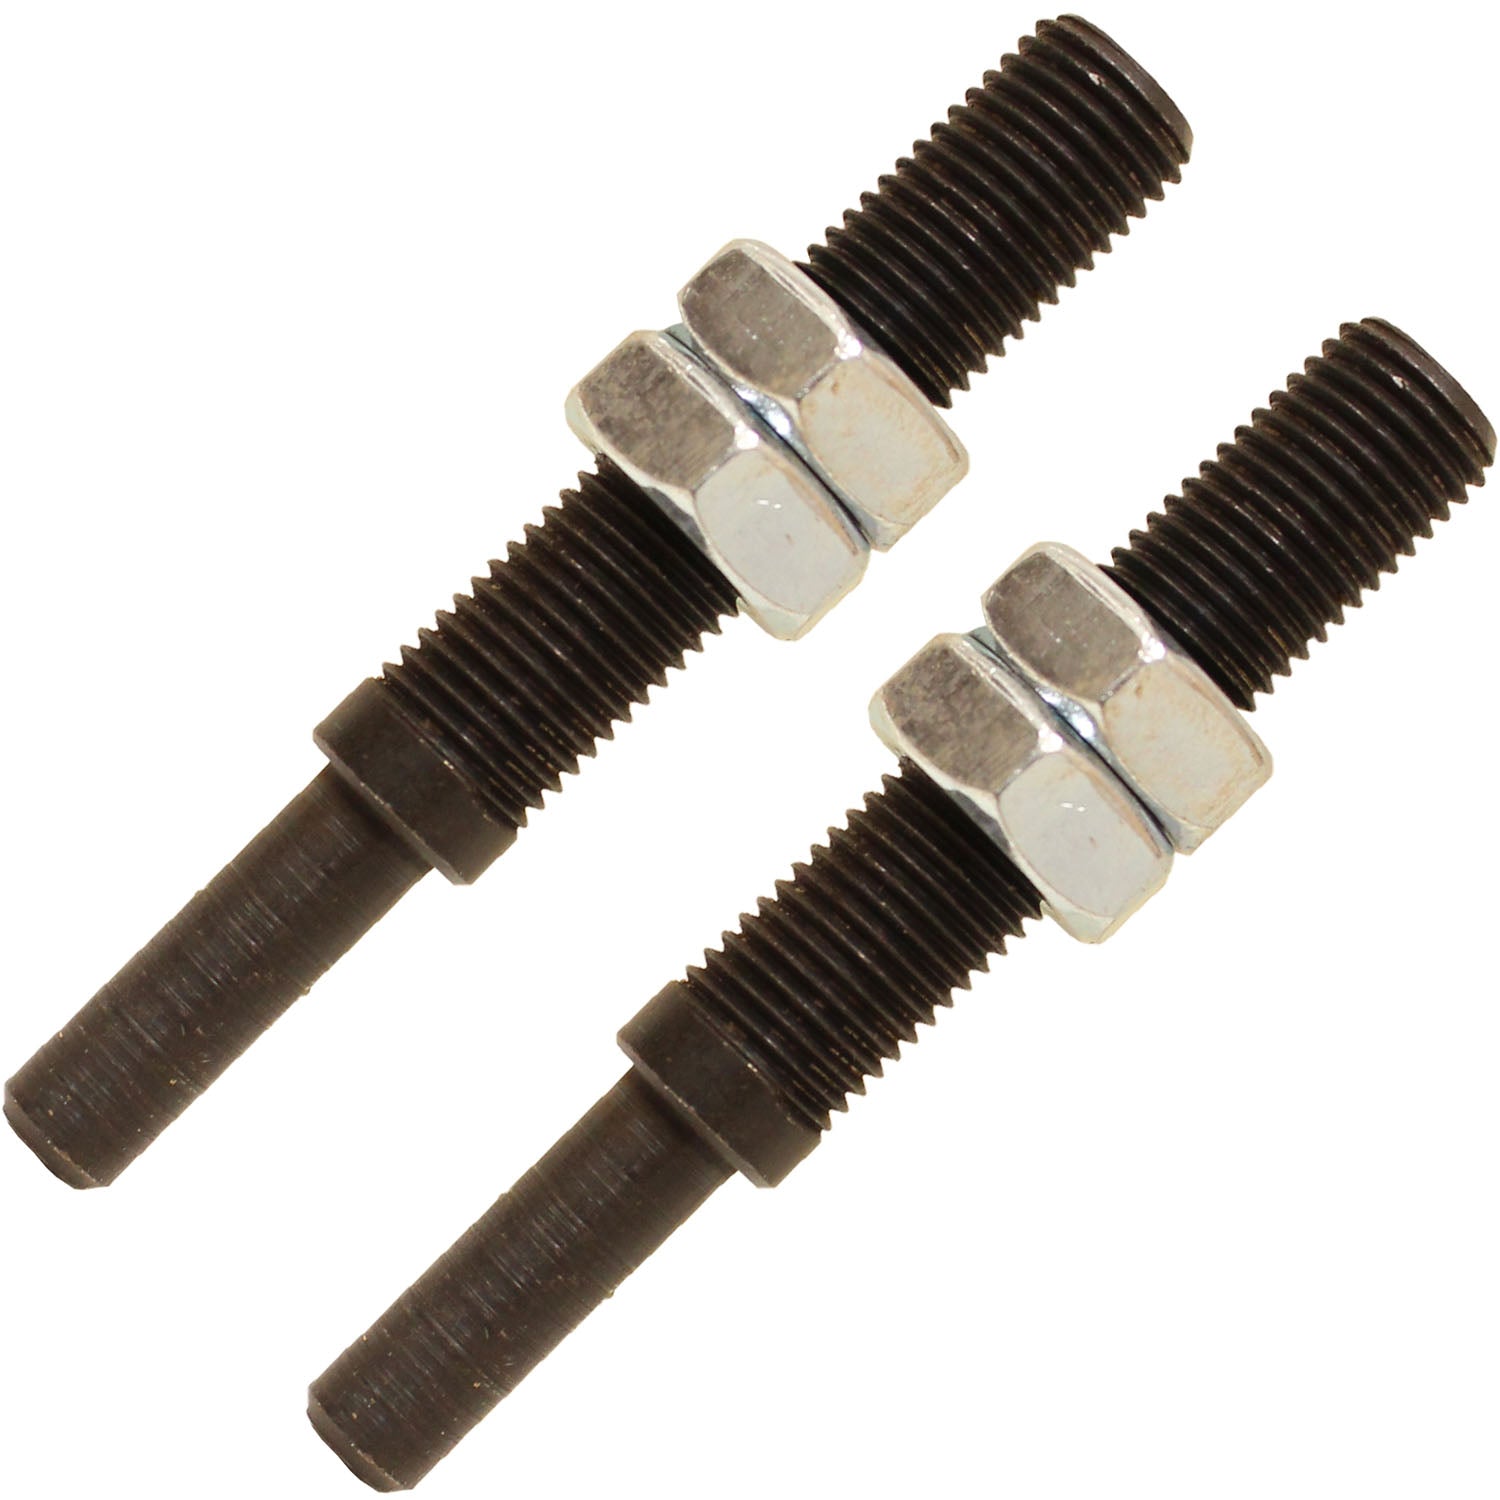 REMA TIP TOP 33 Threaded Arbor 1/4" Pack of 2